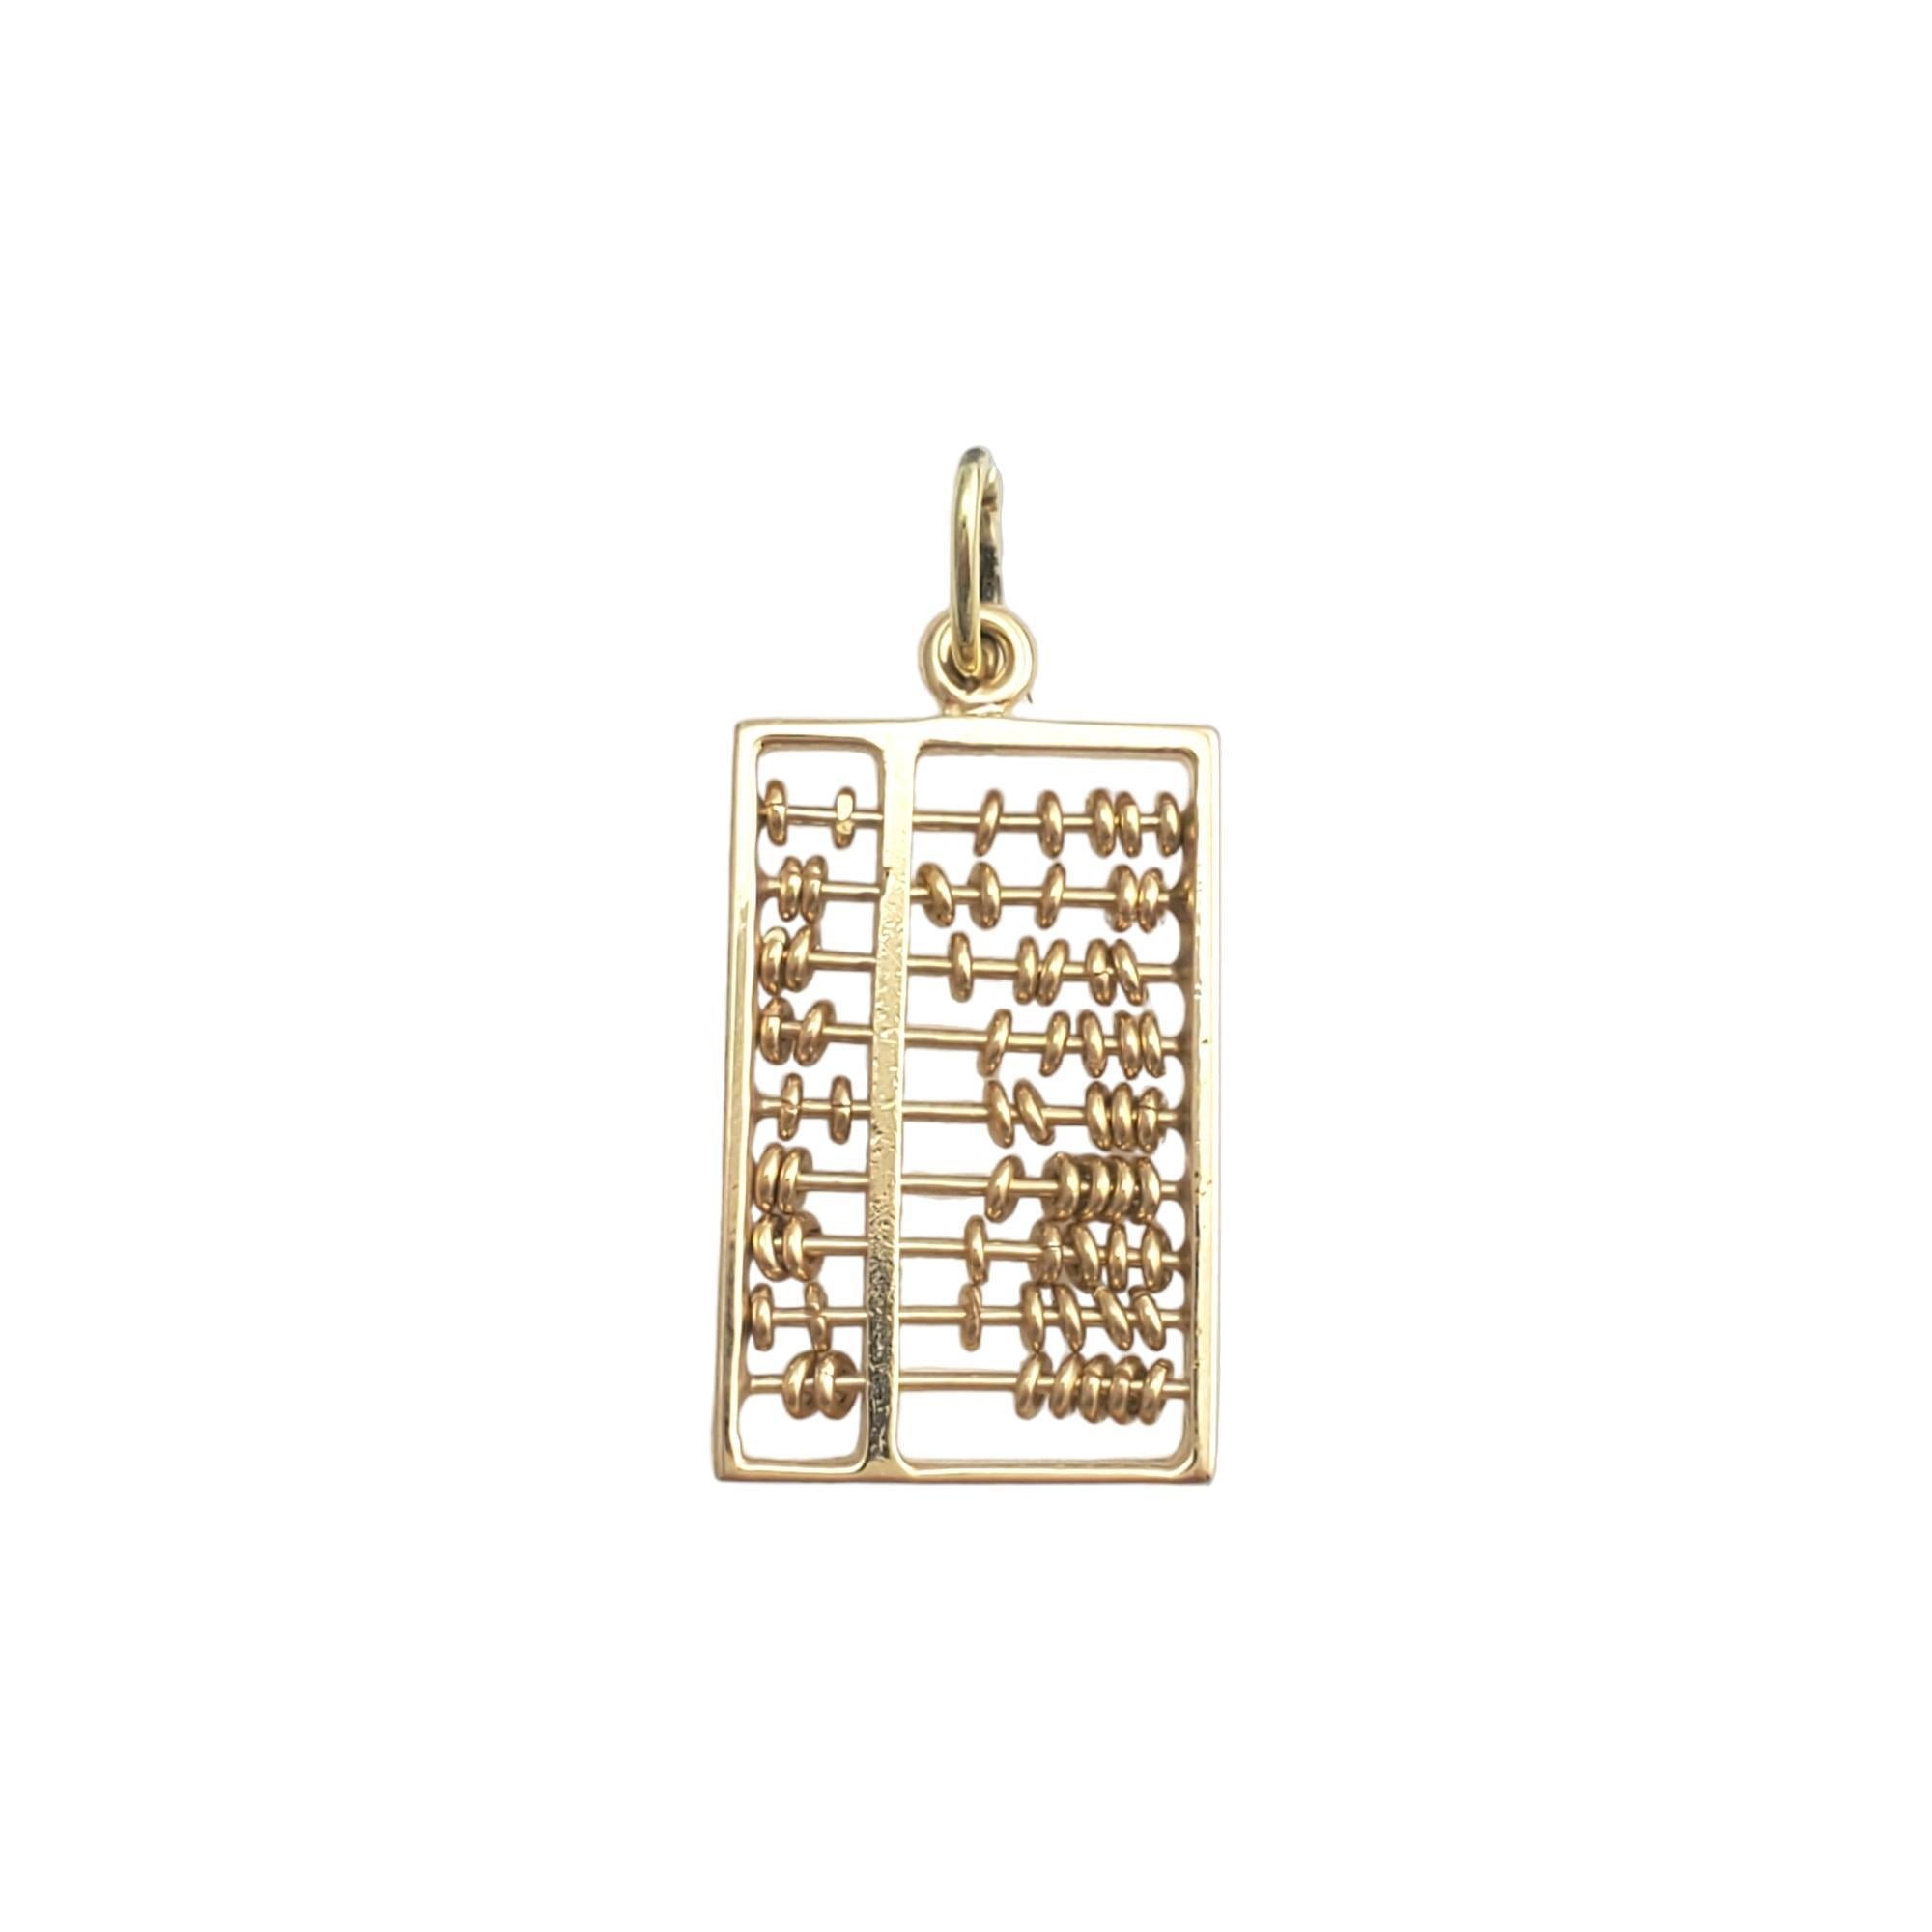 14K Yellow Gold Abacus Charm with Sliding Beads #16599 In Good Condition For Sale In Washington Depot, CT